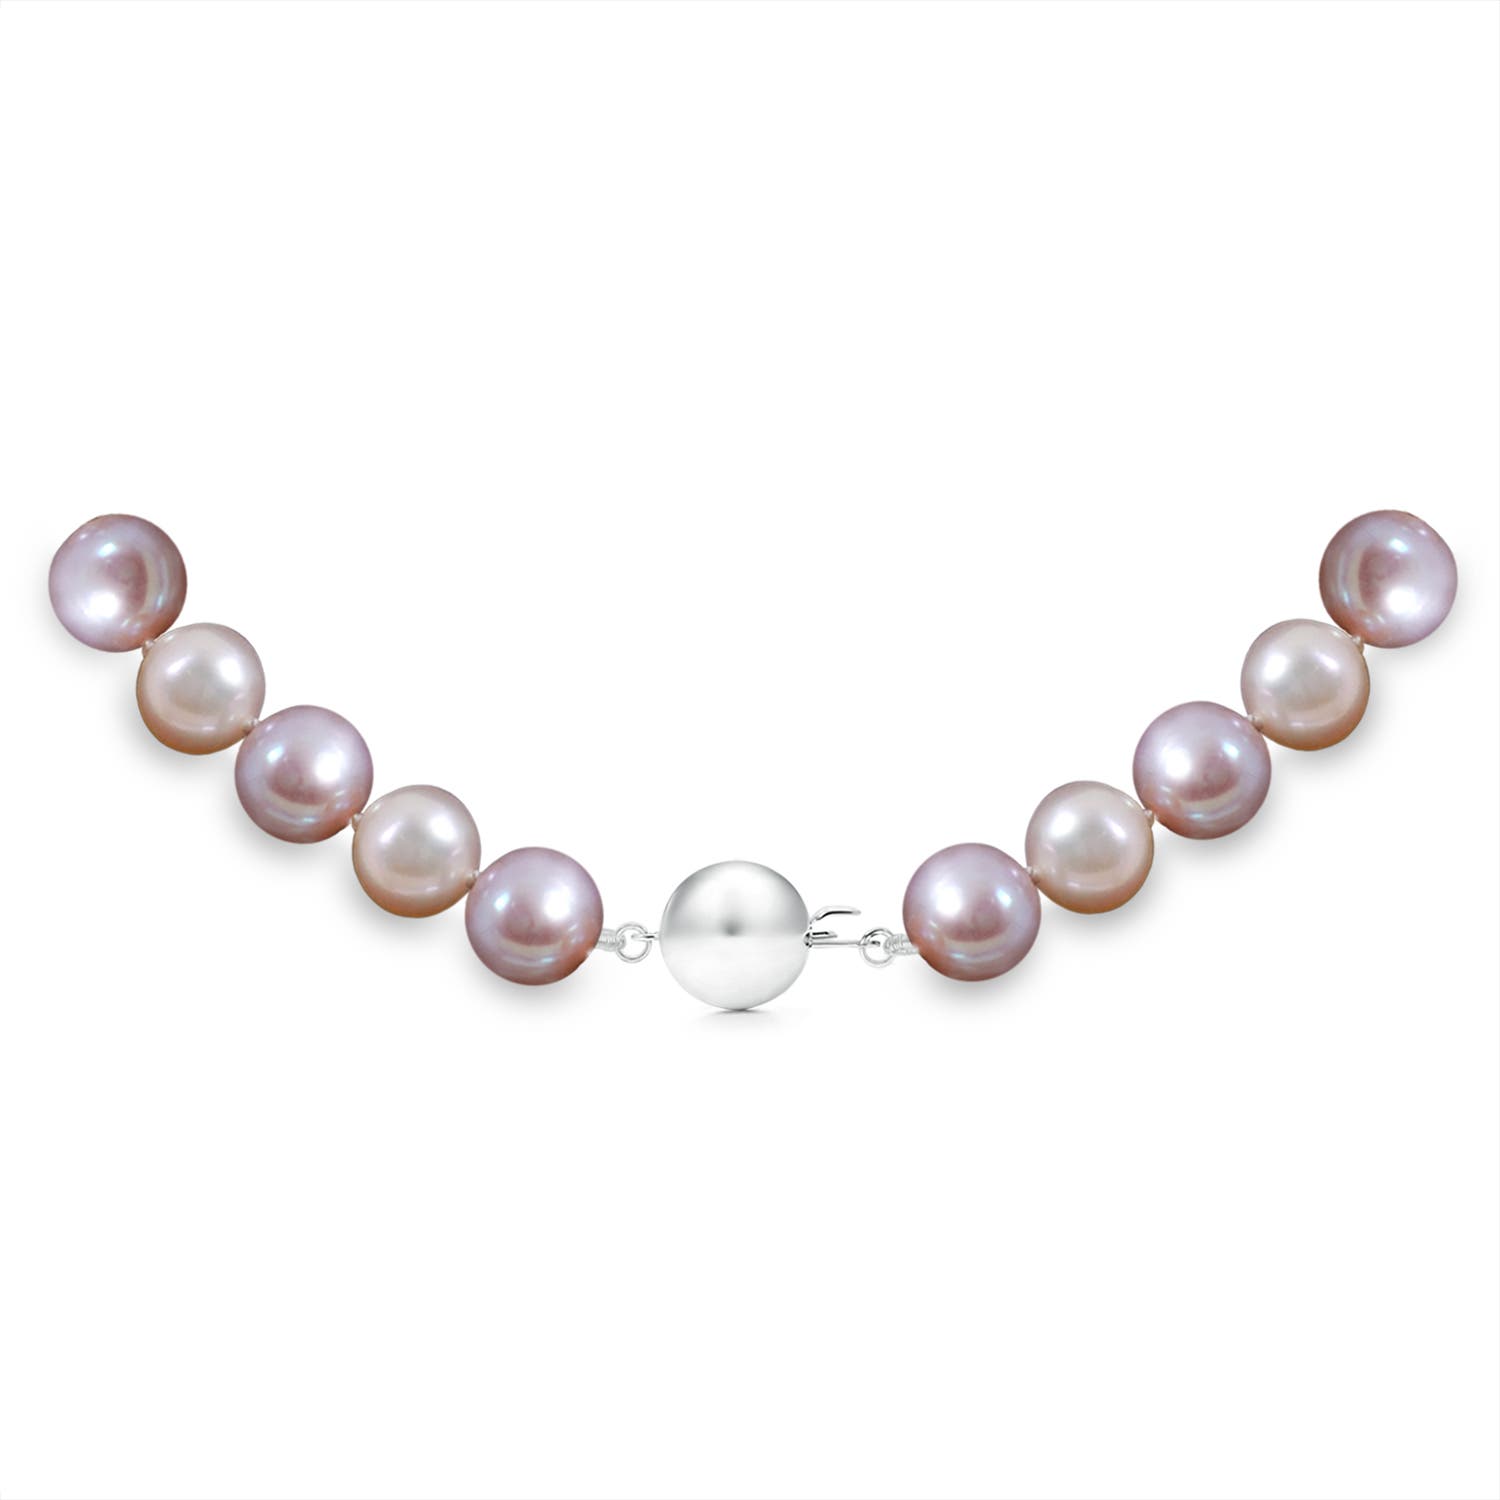 Shell core pearl, multicolor, necklace 16mm / 9602 - Gemstones online